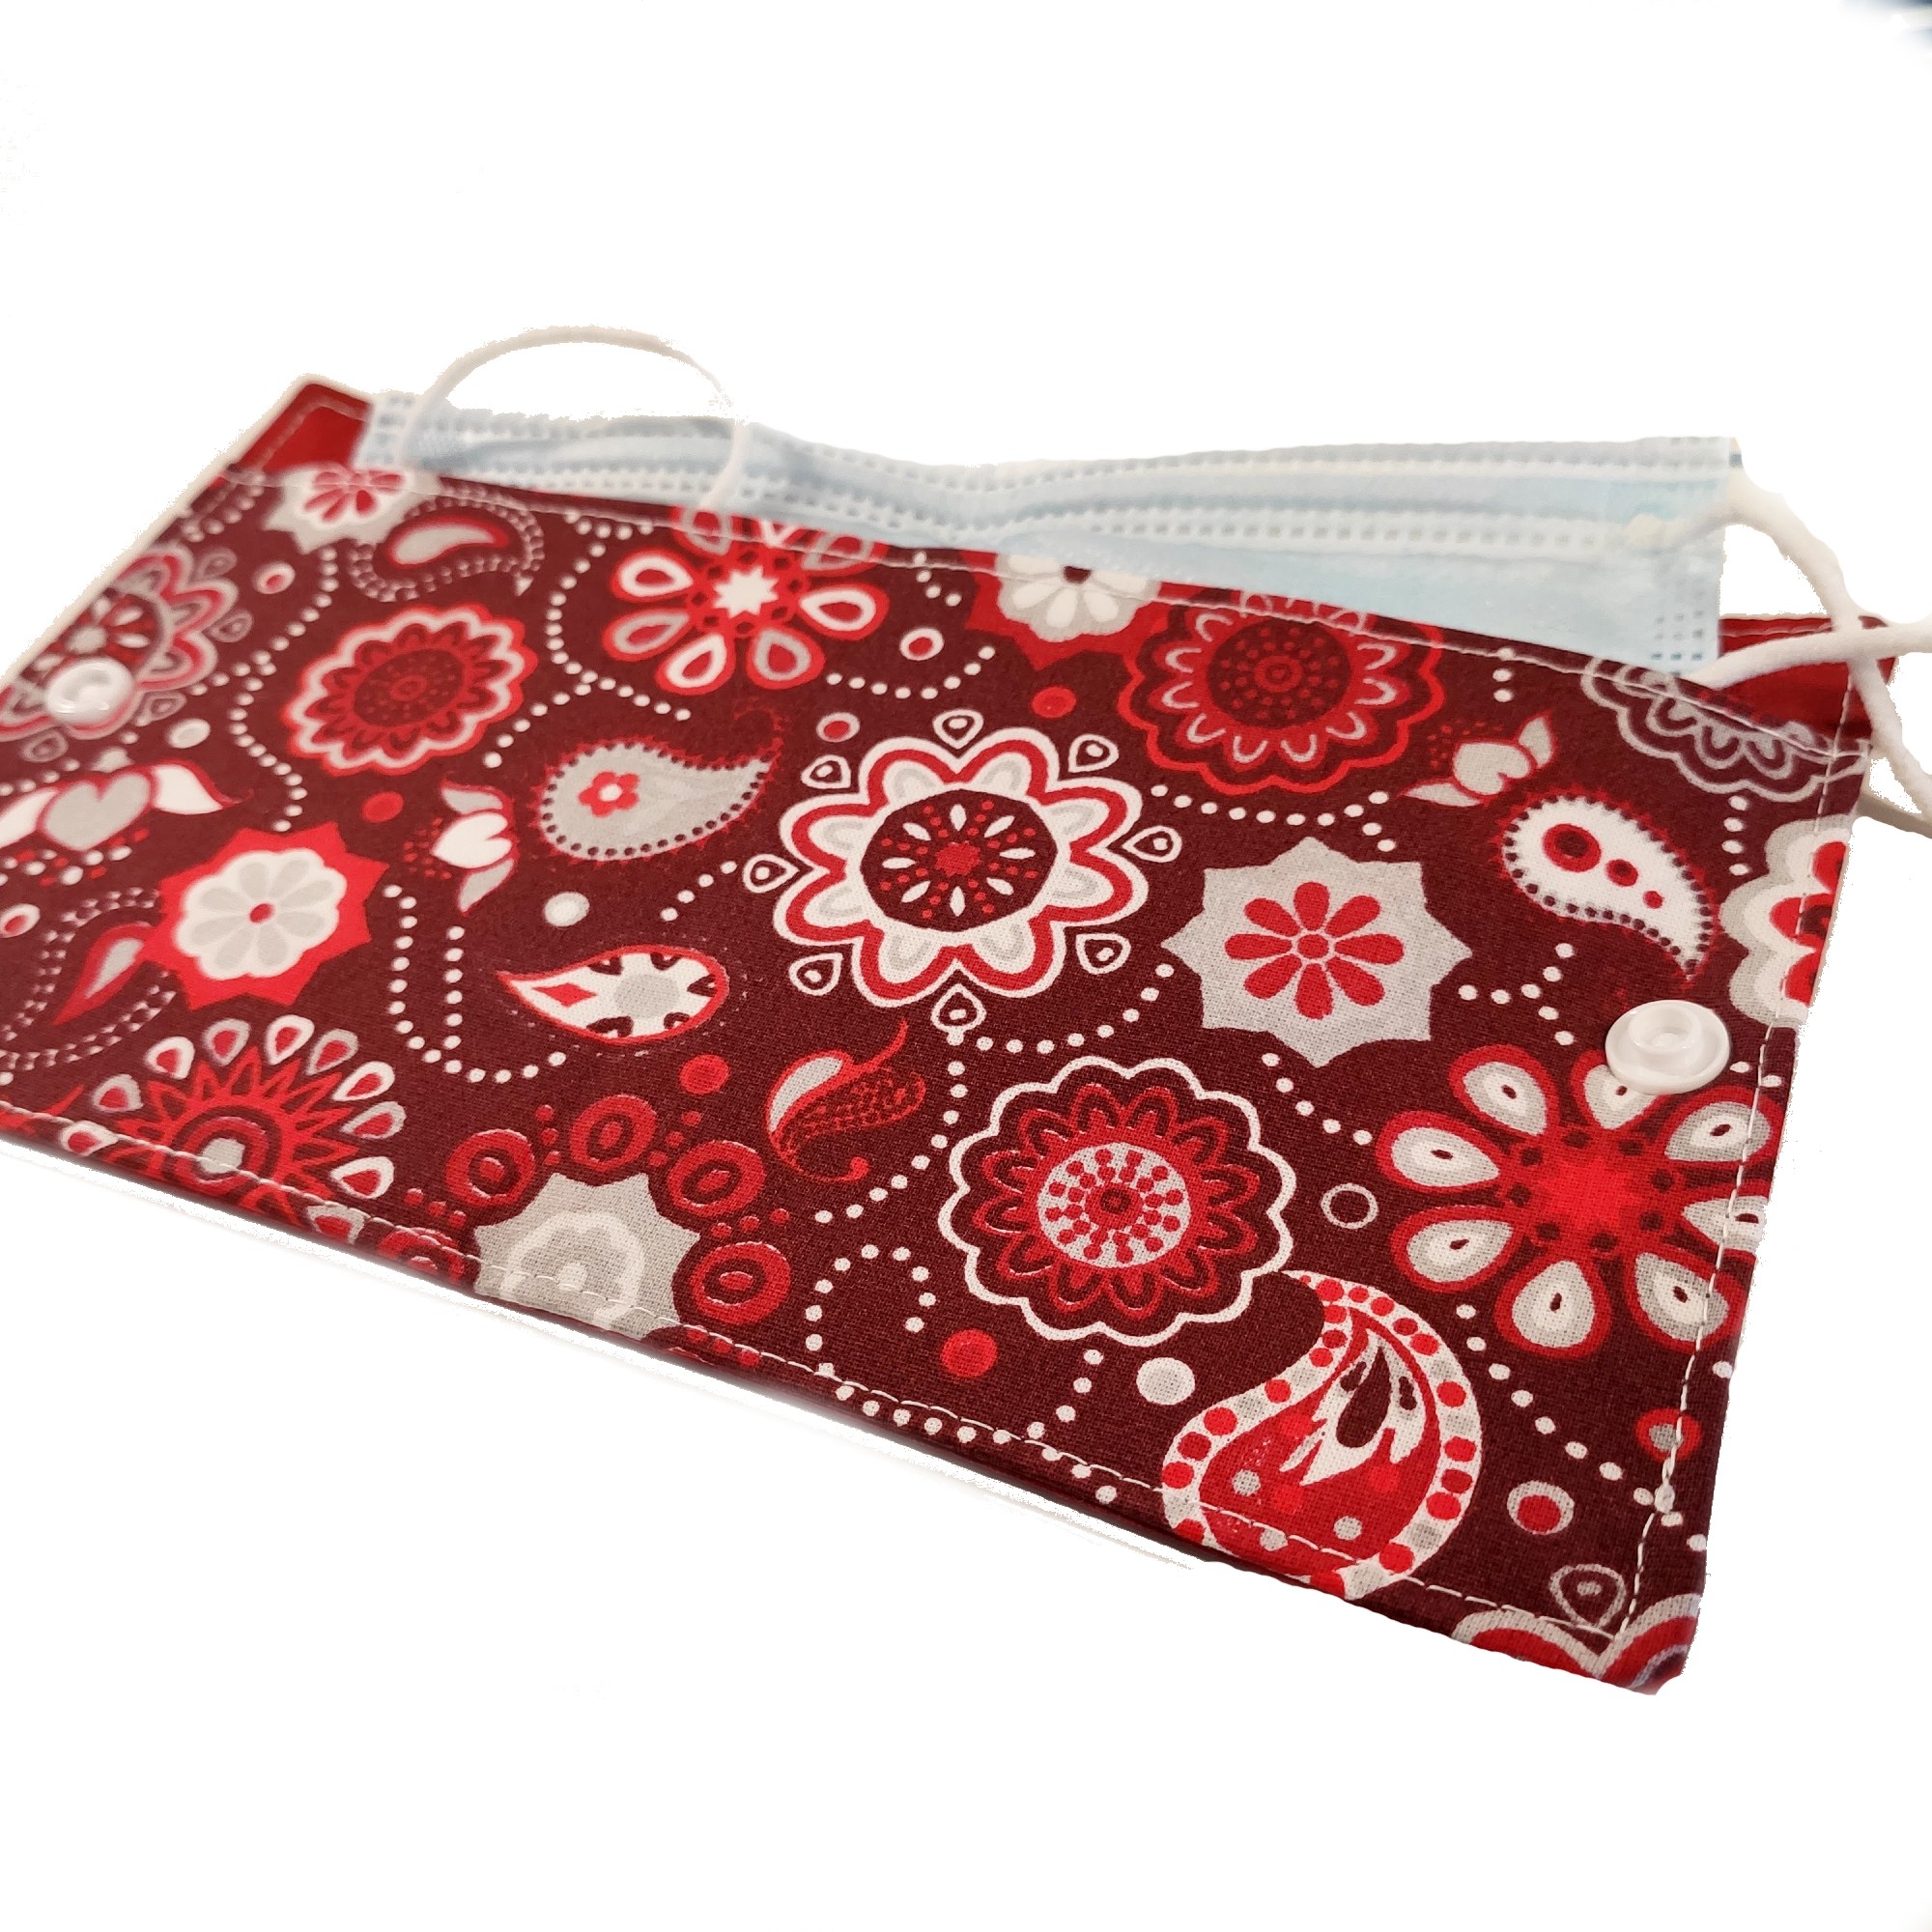 Roll Up Pencil Case in 2 sizes Sewing Pattern